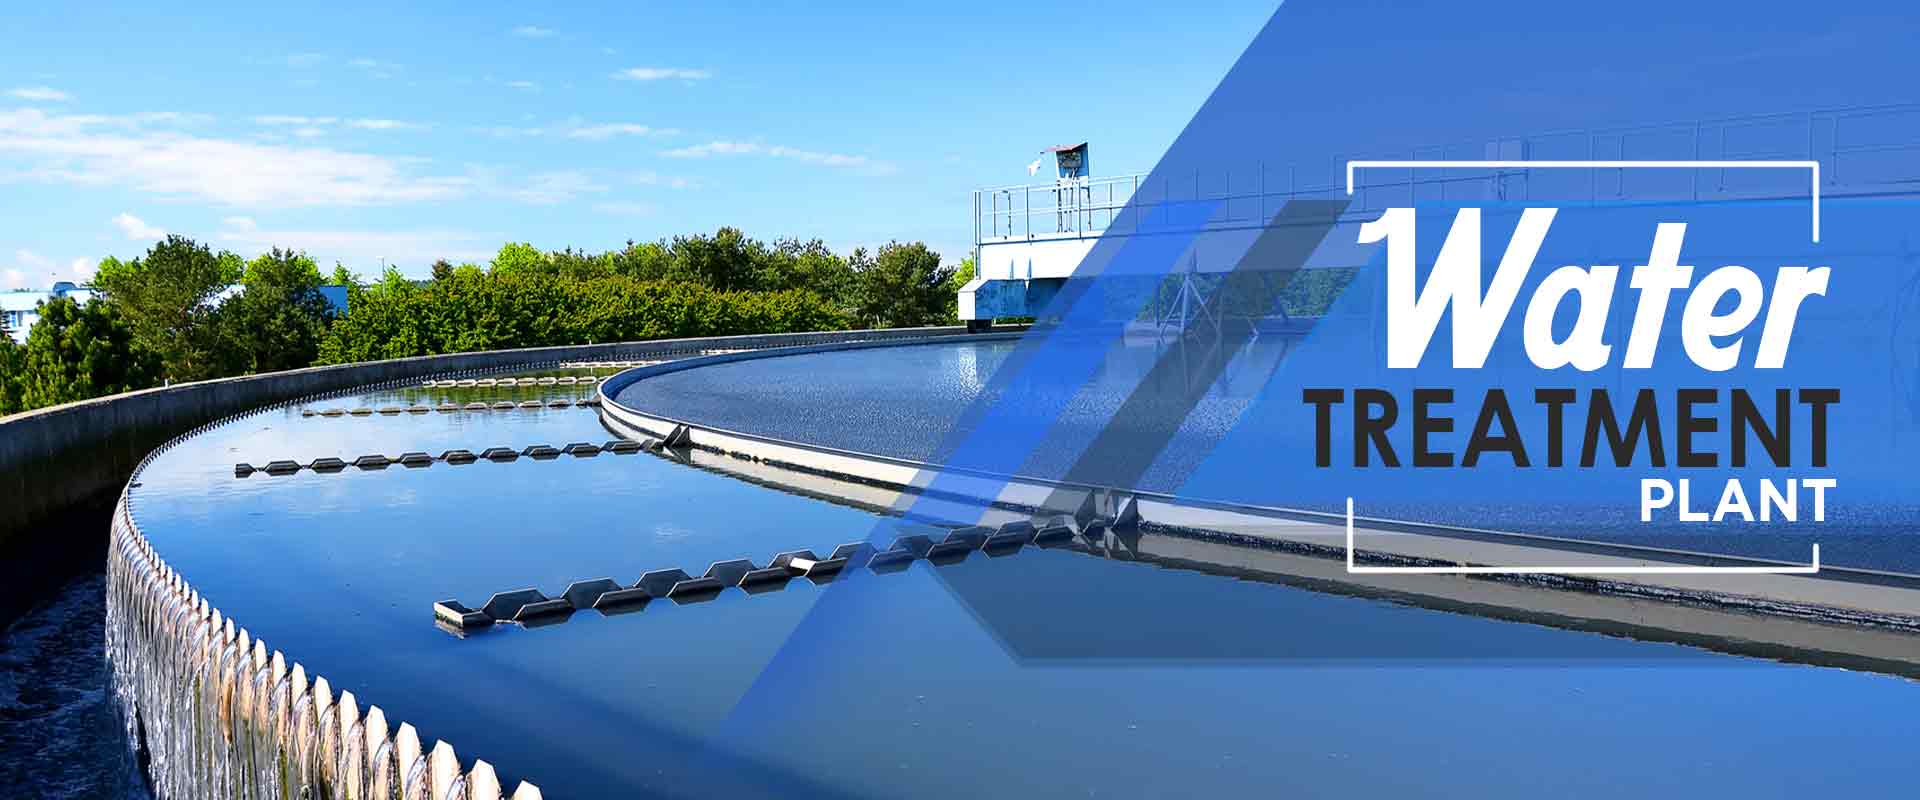 Water Treatment Plant In Oklahoma